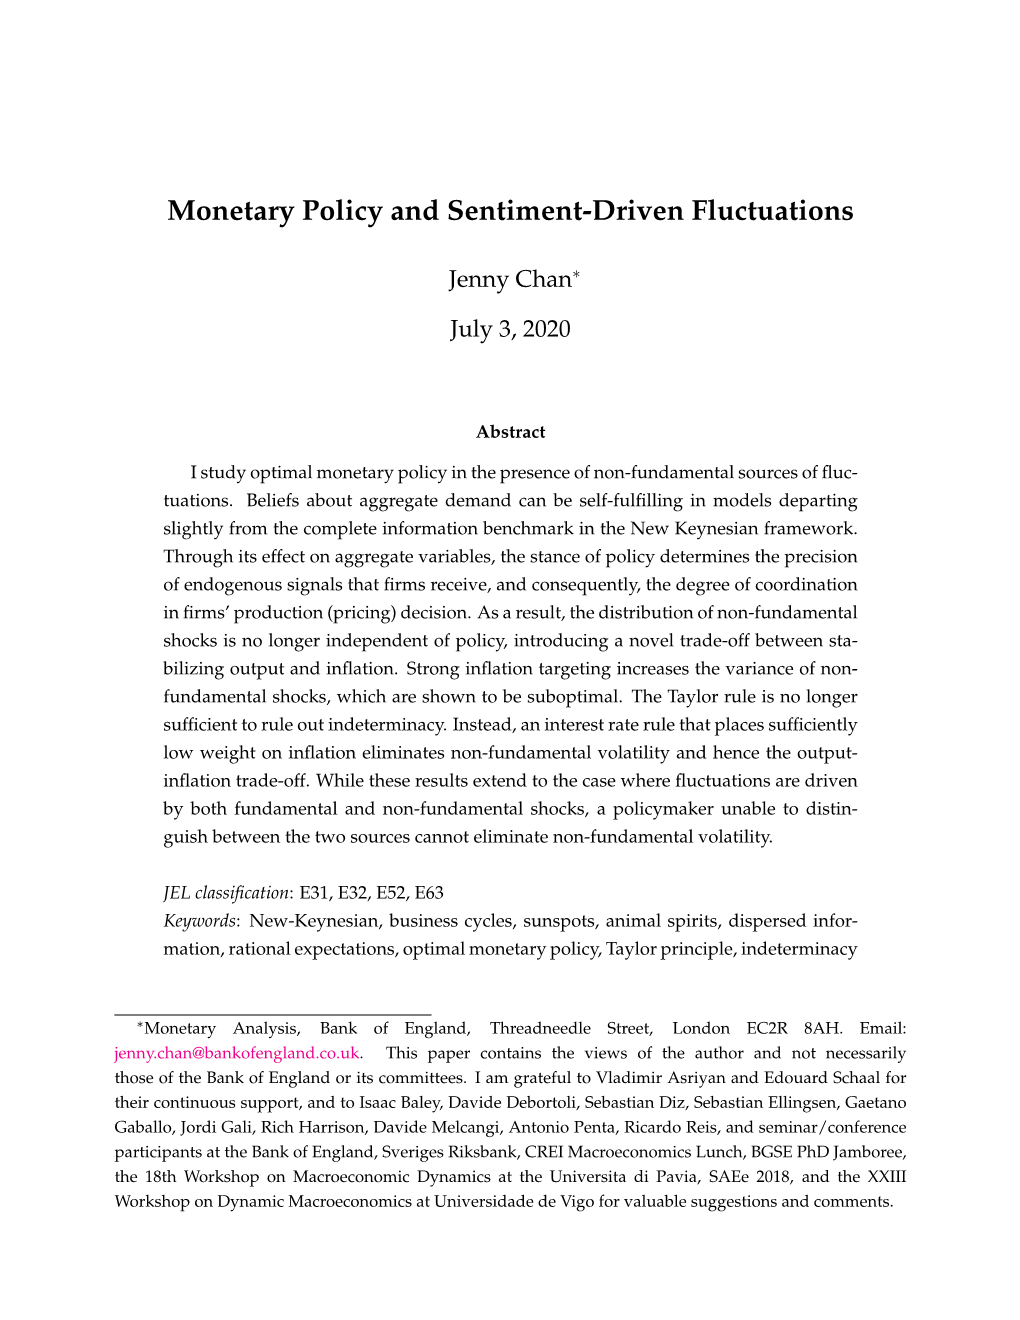 Monetary Policy and Sentiment-Driven Fluctuations